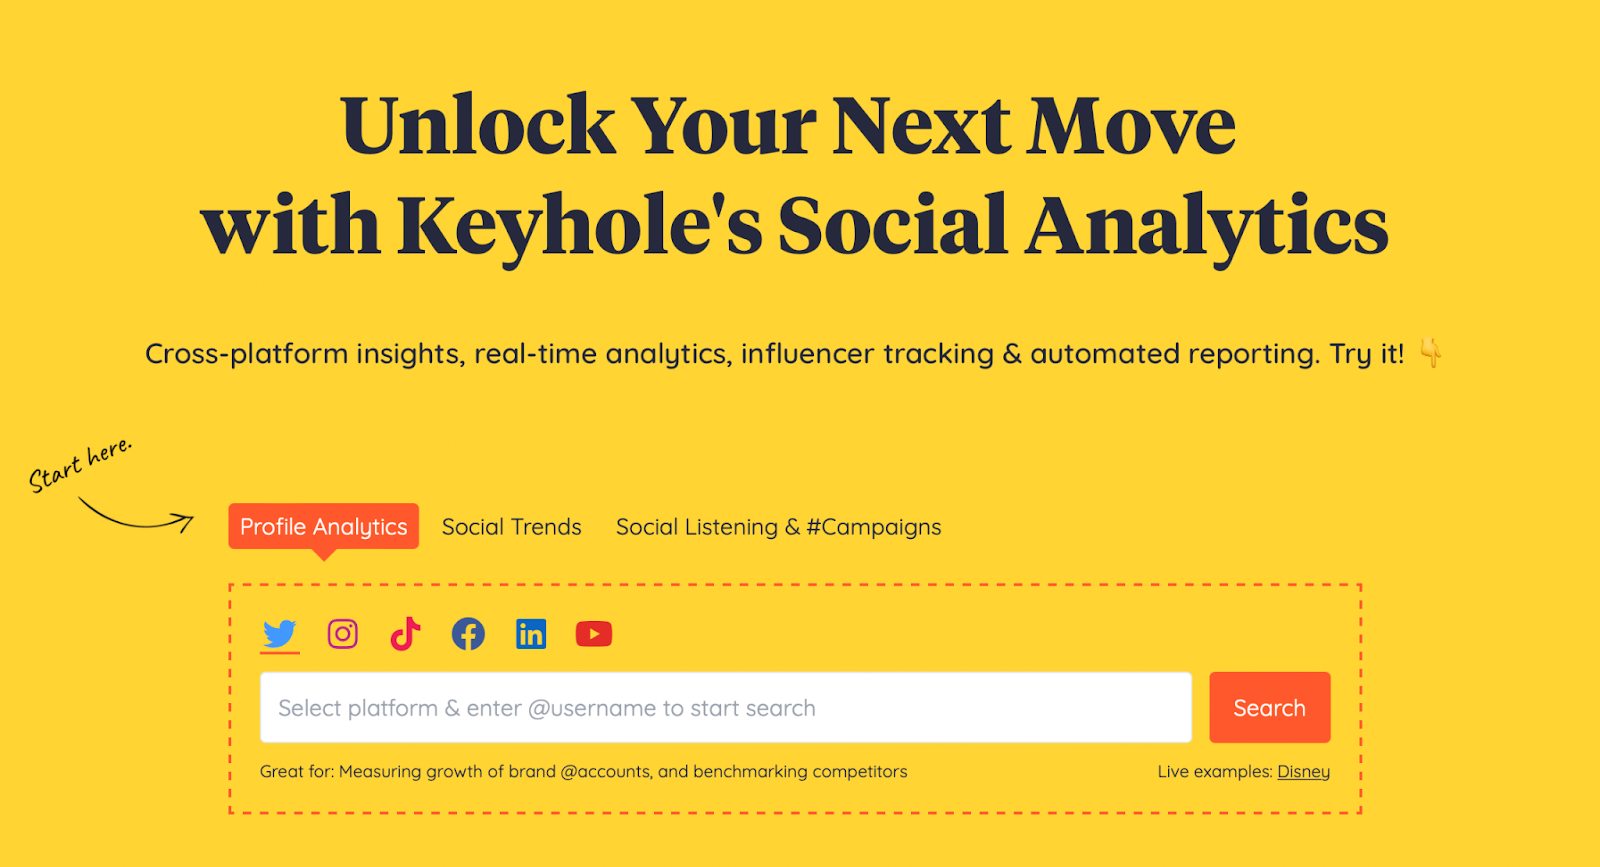 Keyhole is a social media auto poster that specializes in social analytics.